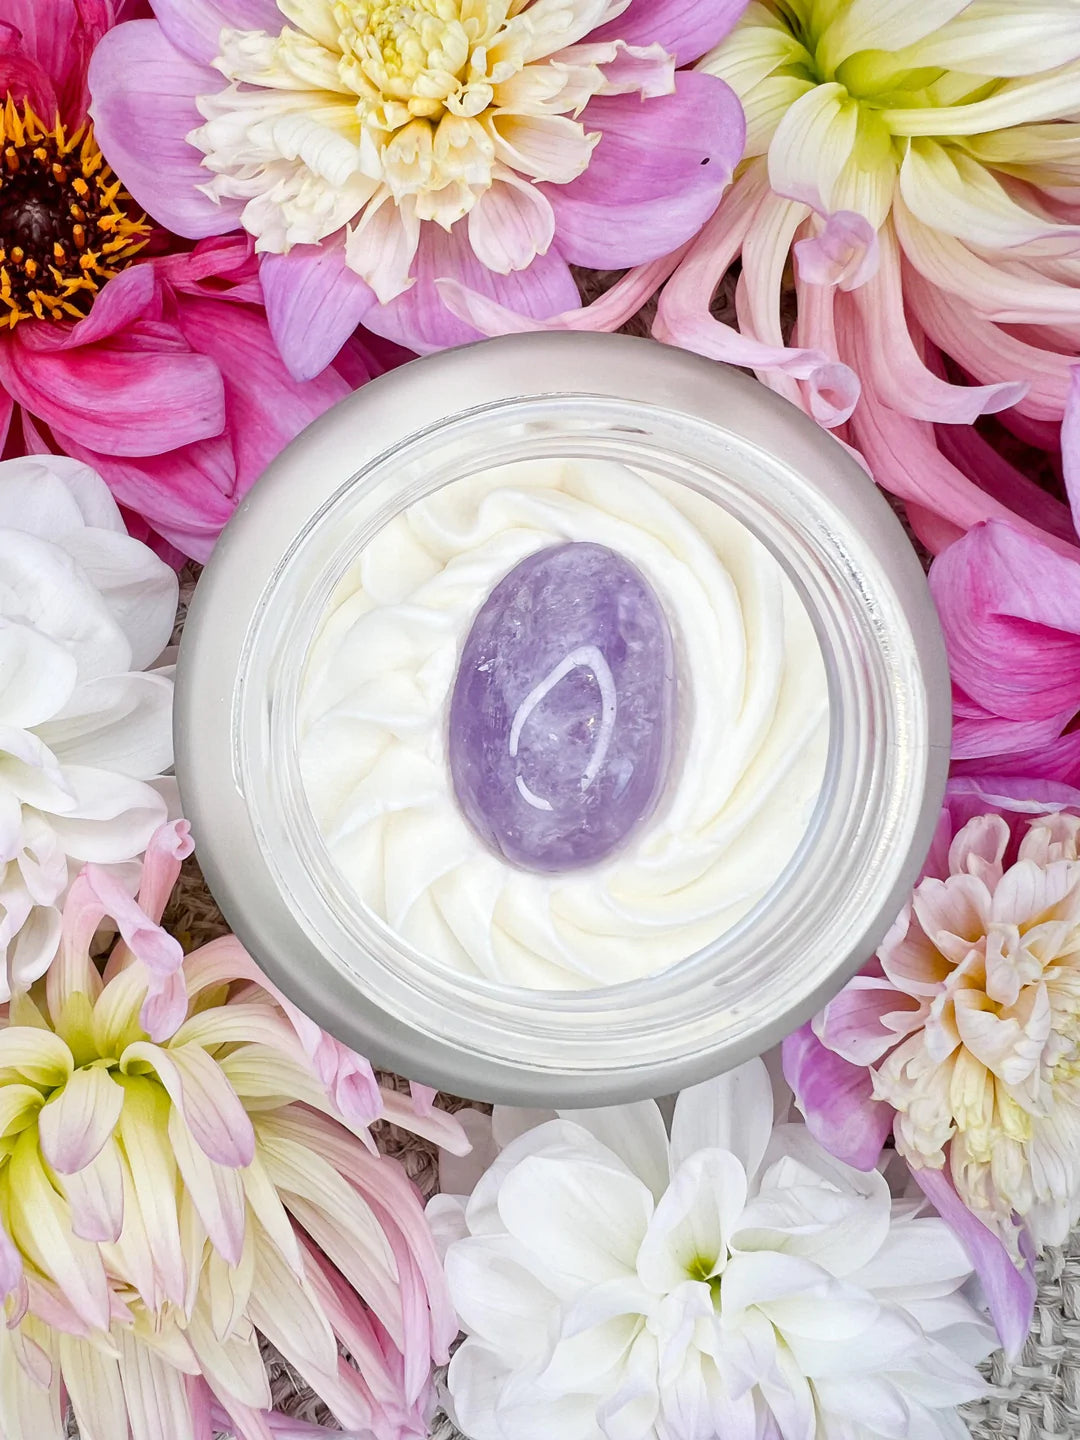 SunbeamNatural Whipped Body Butter Topped with an Amethyst Crystal | Moonlight Scent